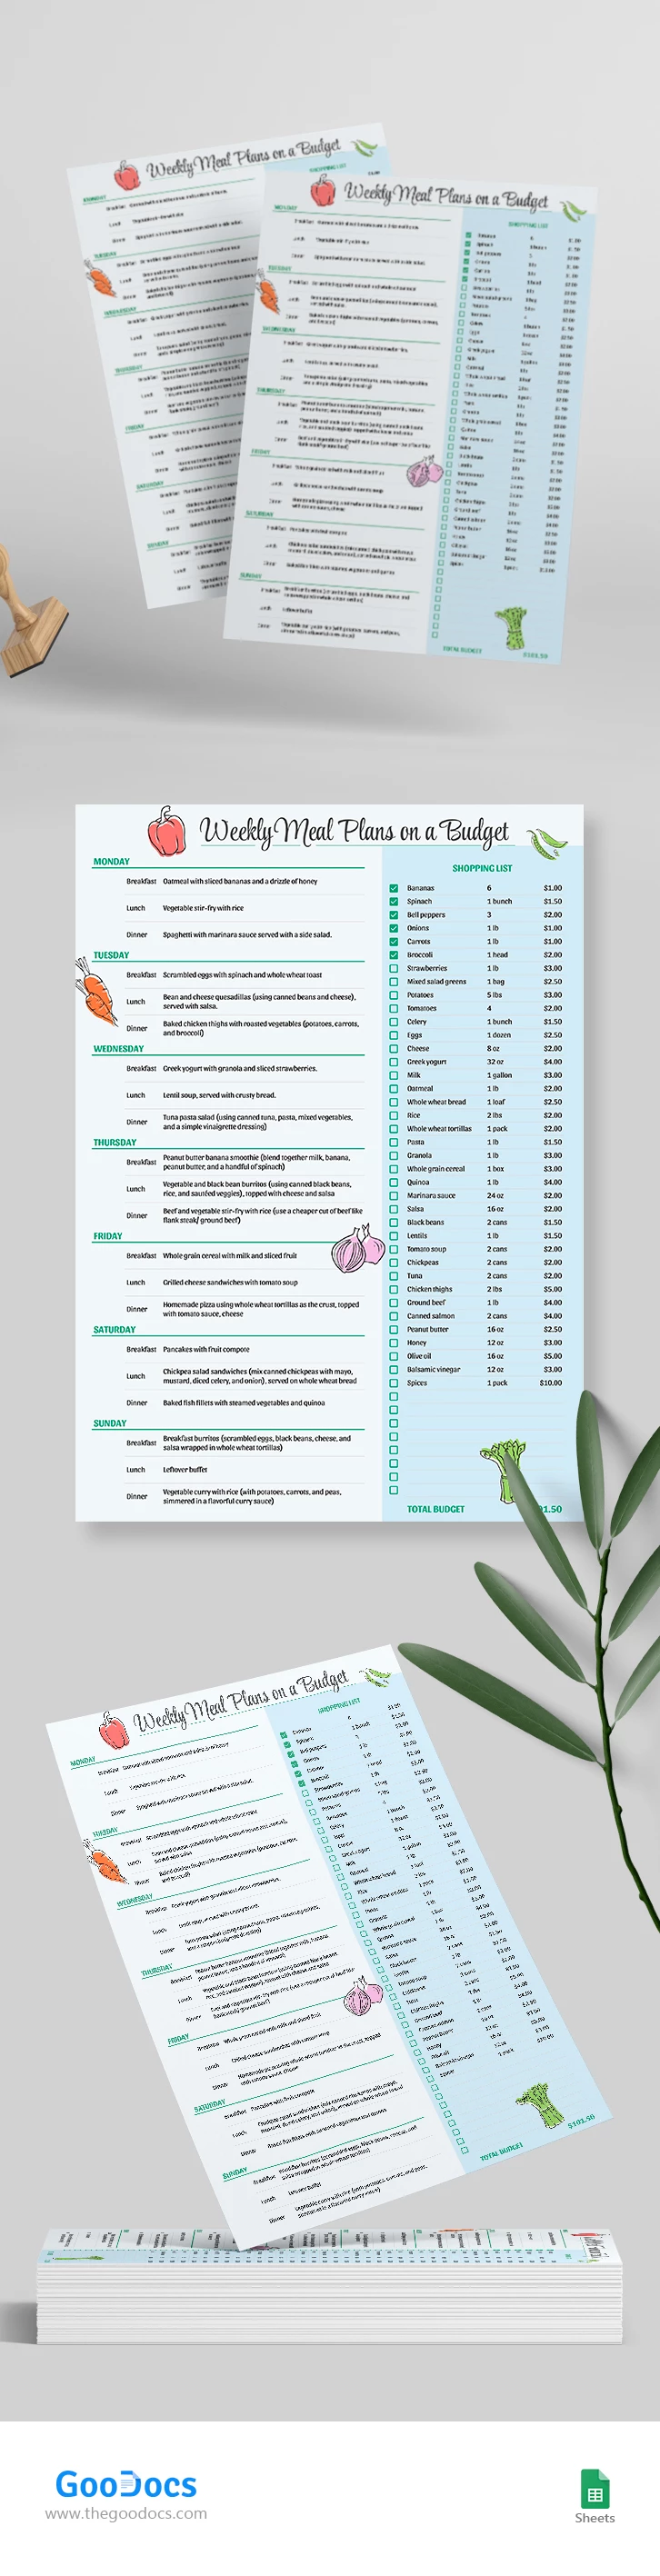 Budget hebdomadaire alimentaire - free Google Docs Template - 10068456